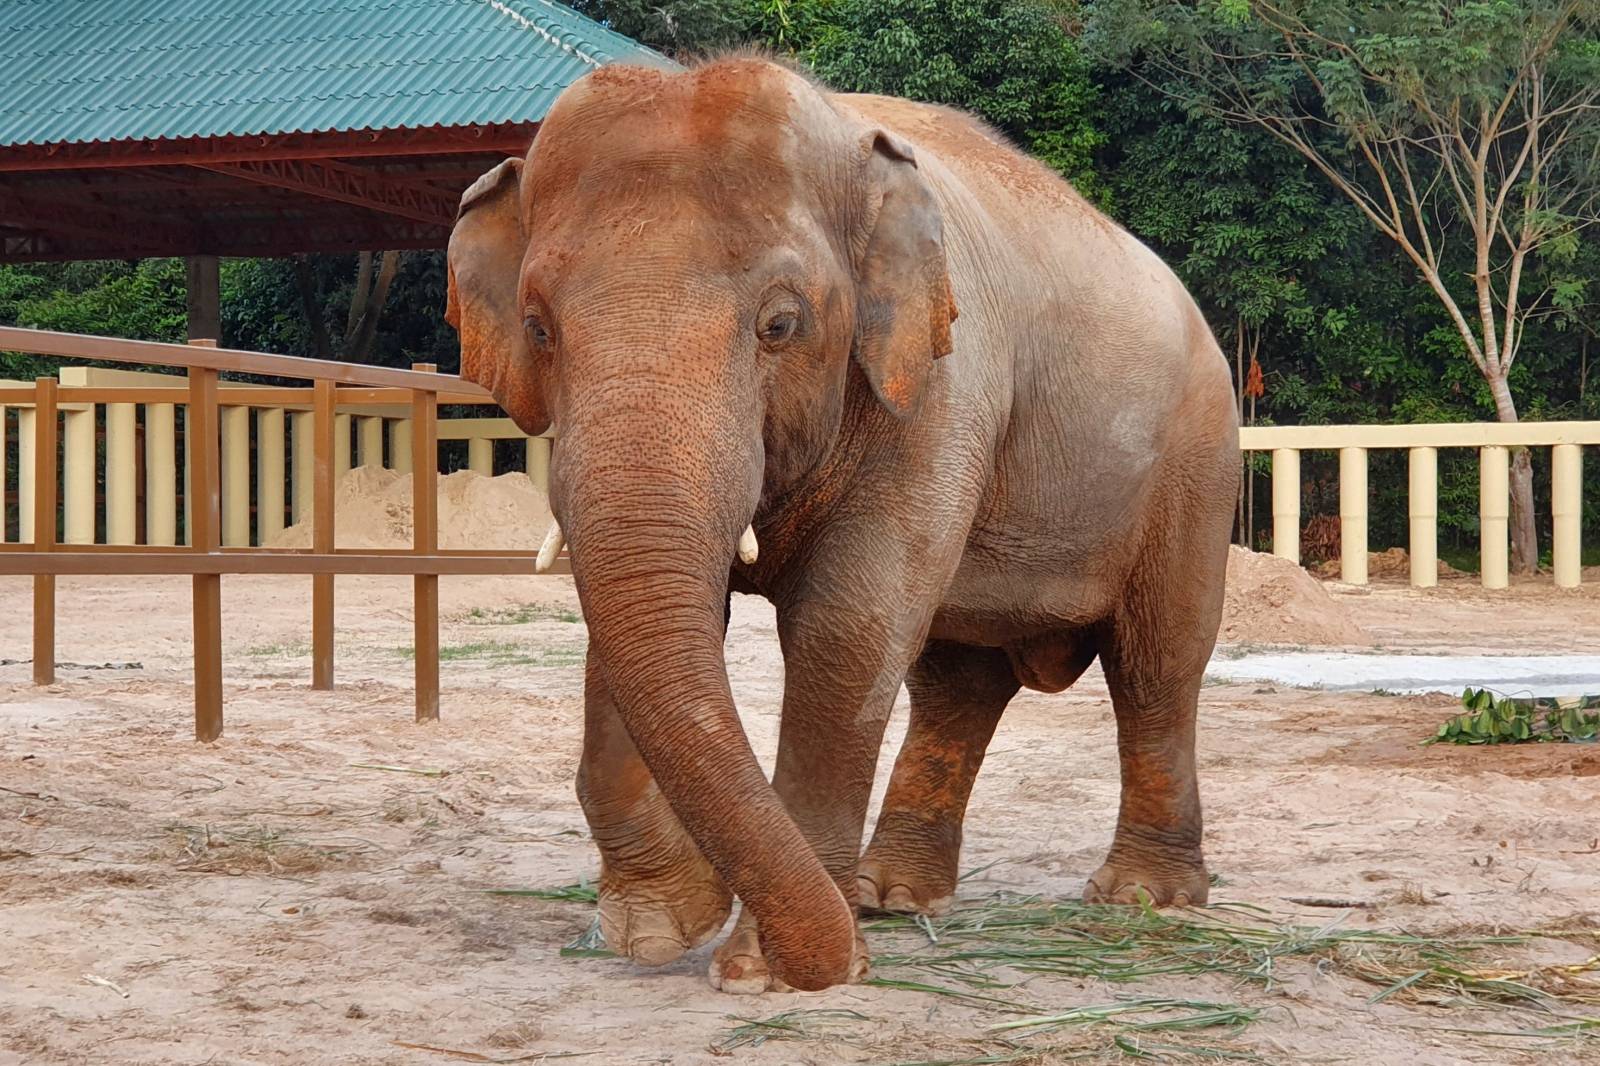 Kaavan, an elephant transported from Pakistan to Cambodia, is seen at the sanctuary in Oddar Meanchey Province